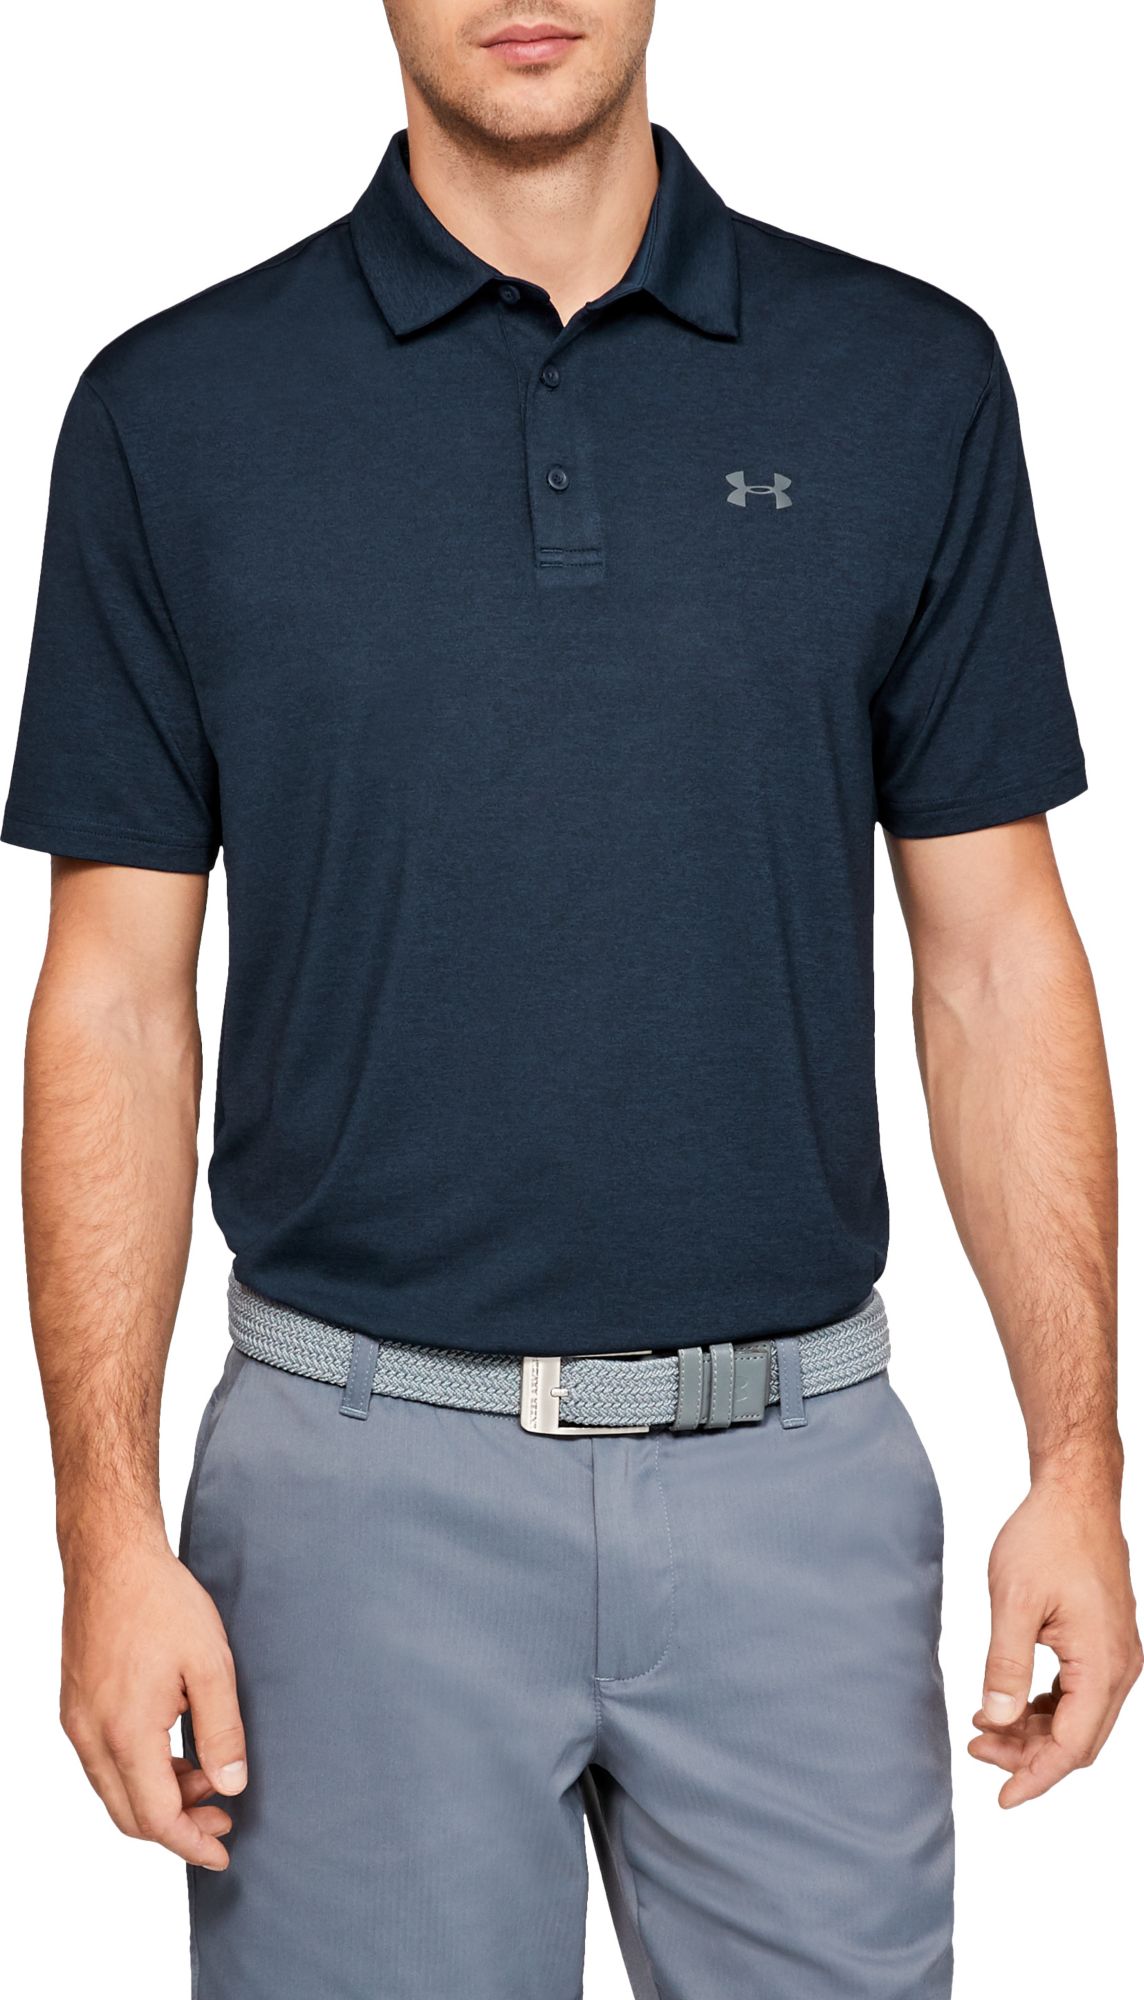 under armour mens golf shirts on sale